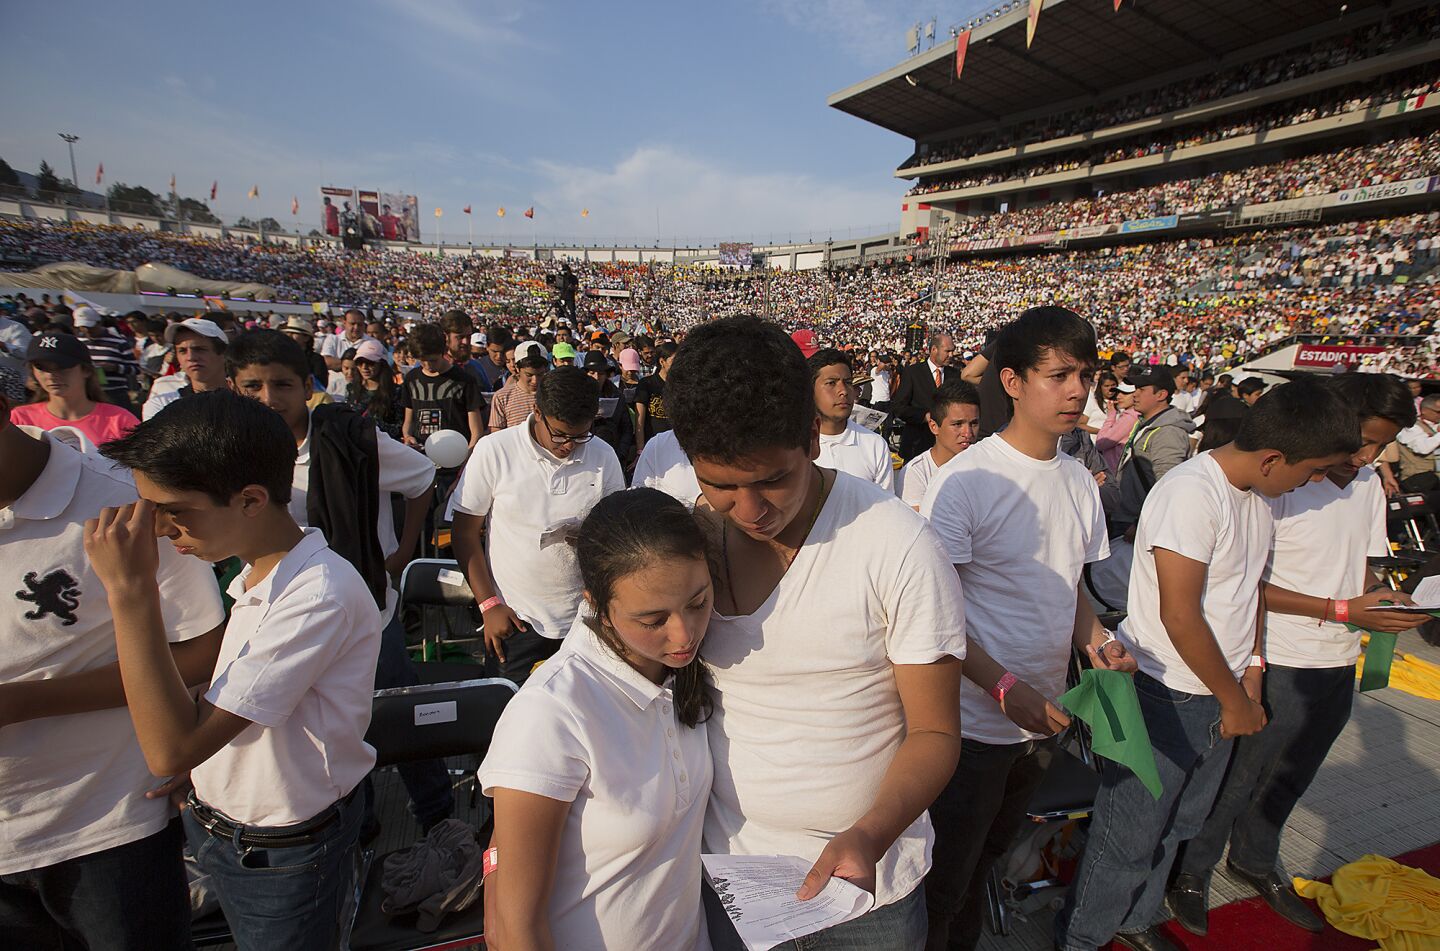 Prayers are offered as Pope Francis meets with young people in Morelia in Mexico's Michoacan state on Tuesday.